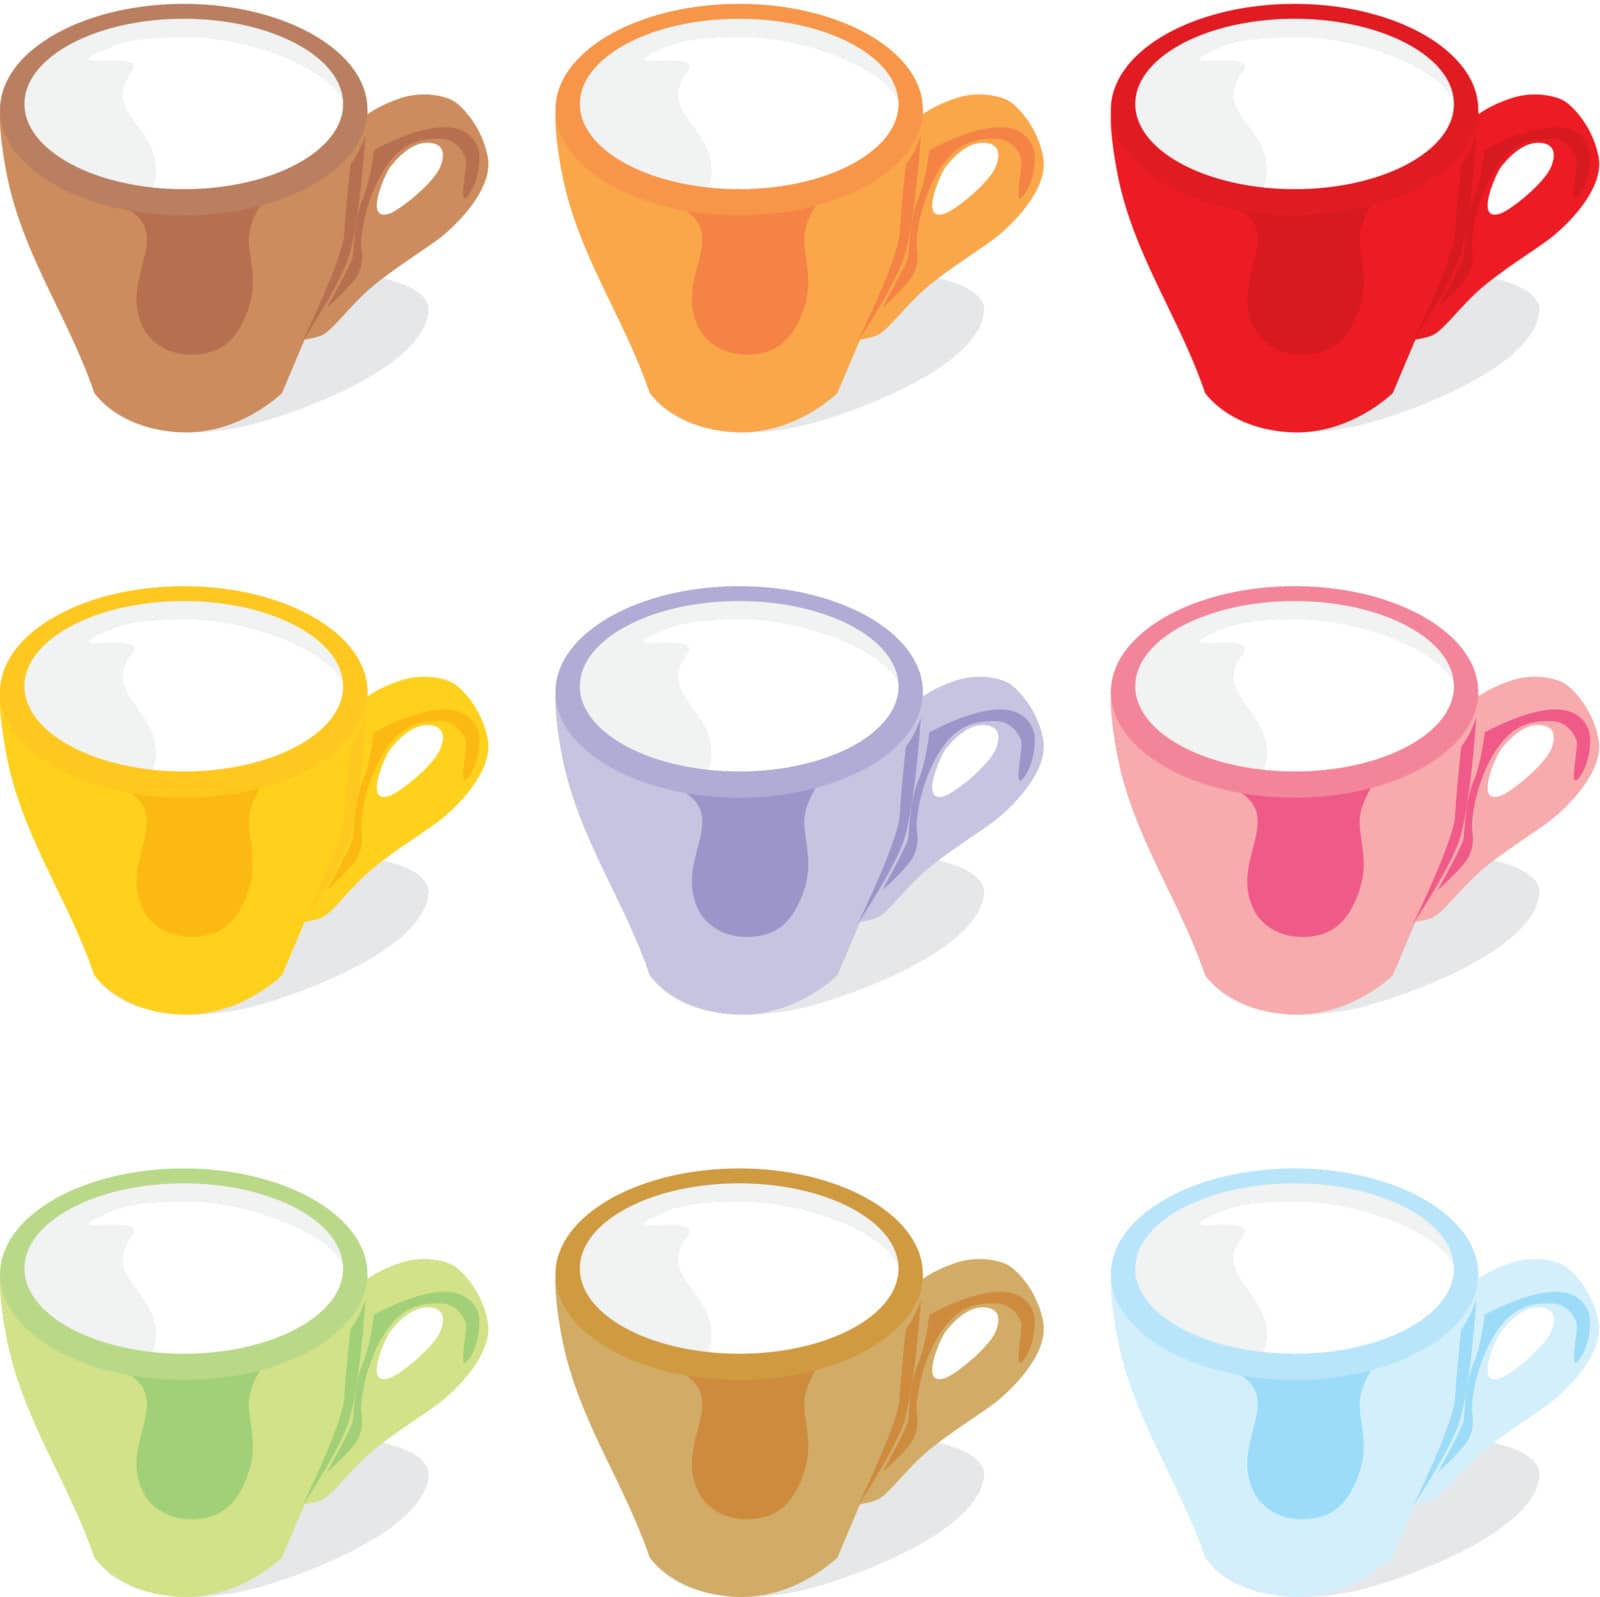 fully editable vector illustration of isolated espresso cups